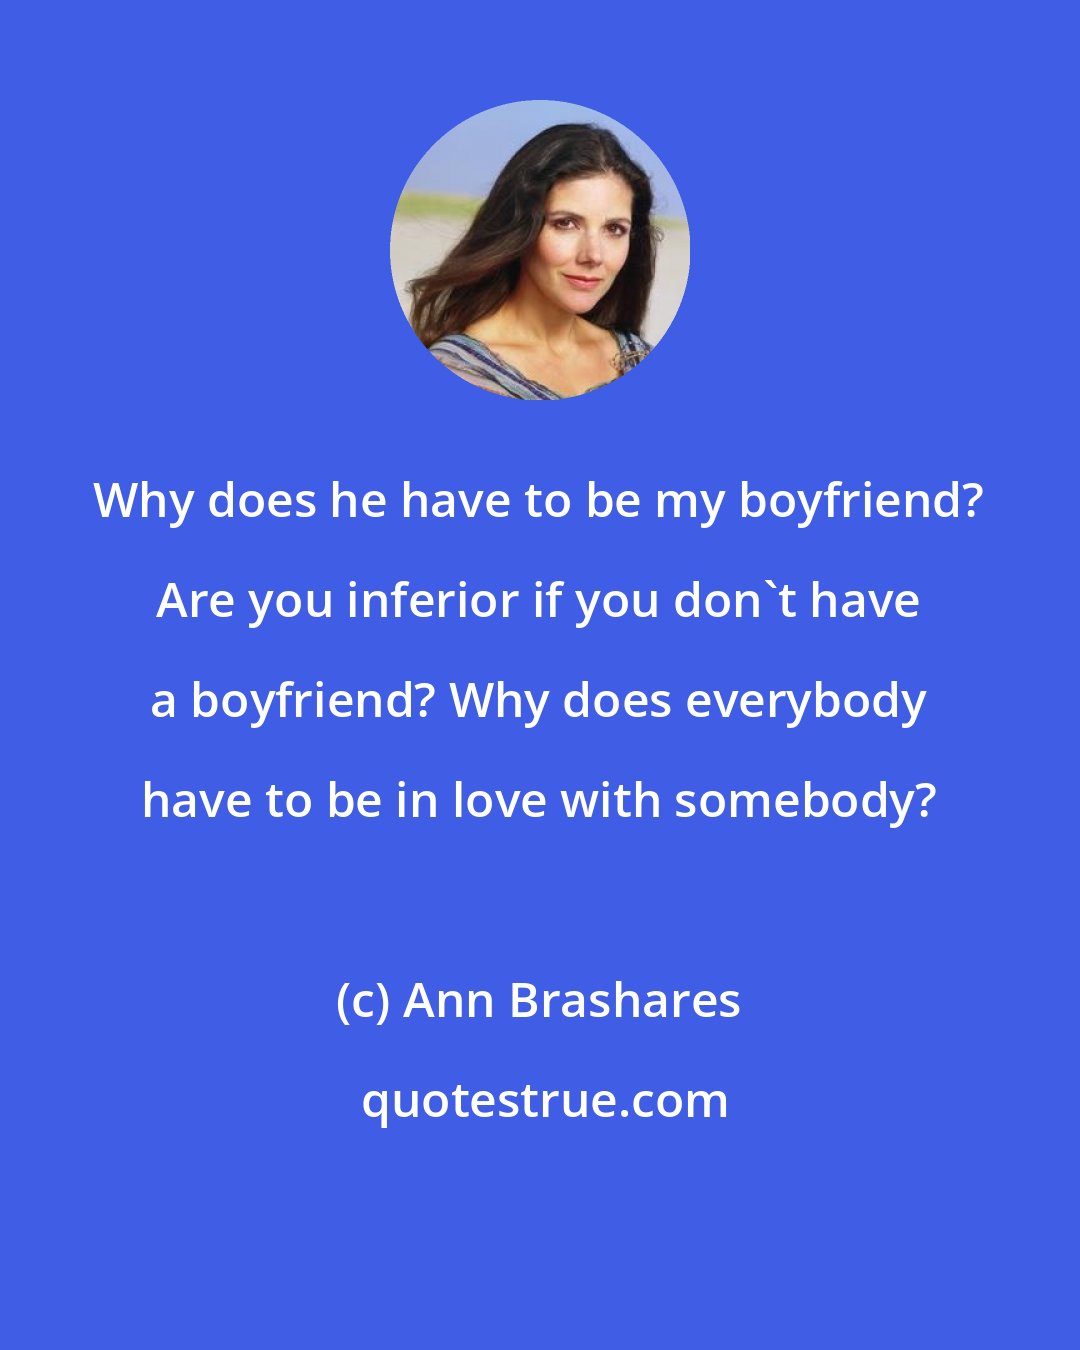 Ann Brashares: Why does he have to be my boyfriend? Are you inferior if you don't have a boyfriend? Why does everybody have to be in love with somebody?